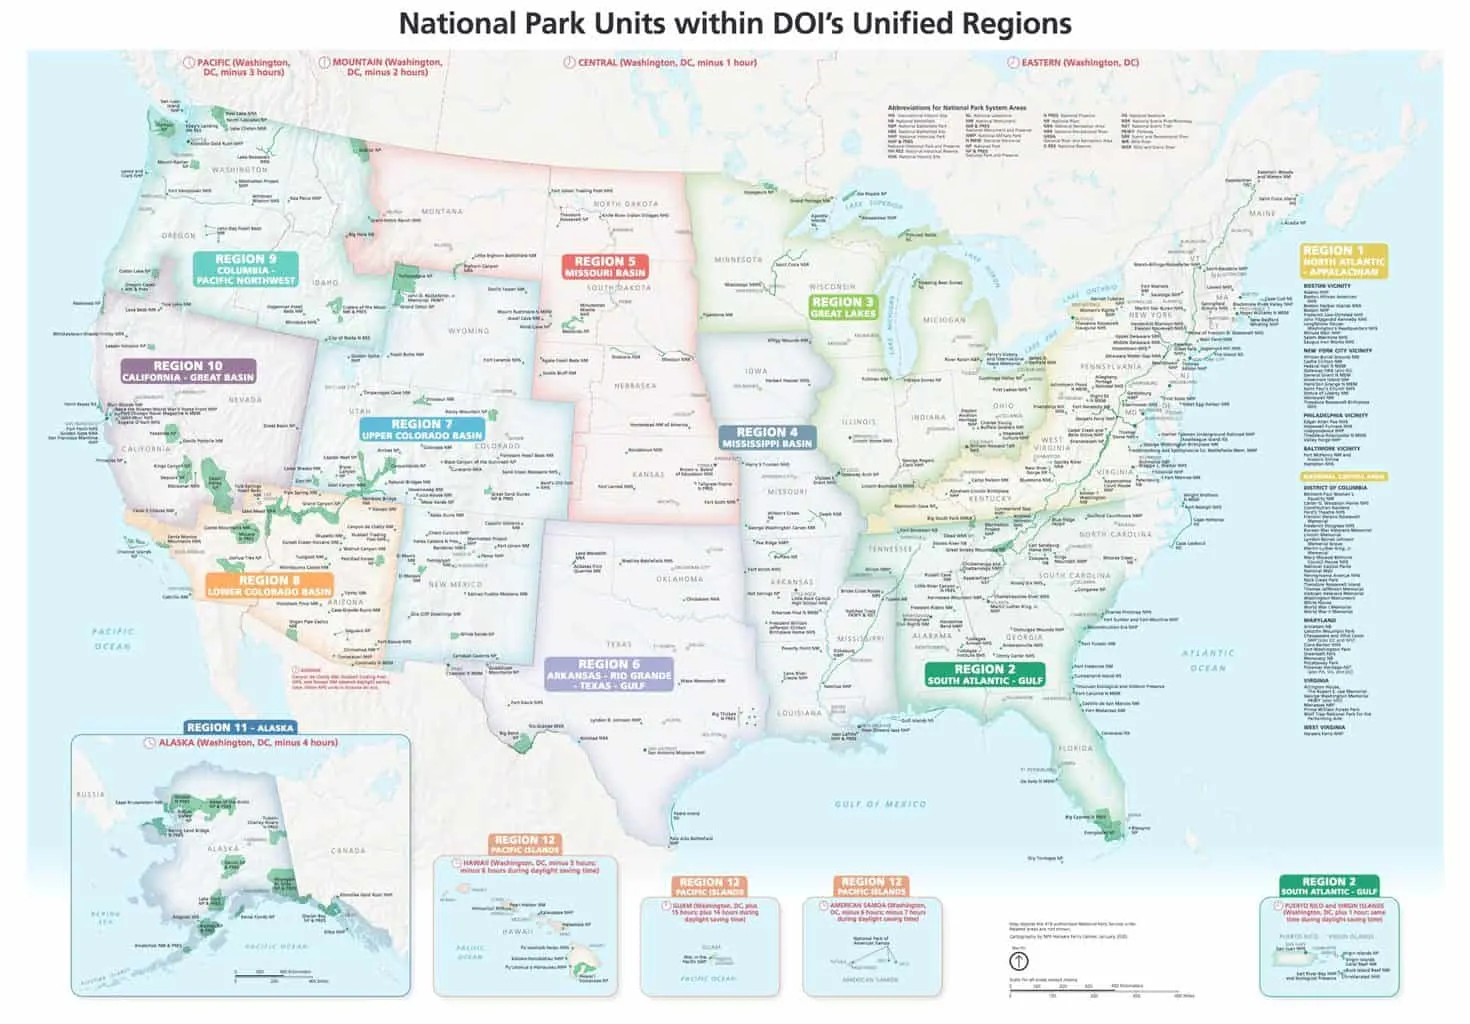 National Park Units divided into regions of the USA.